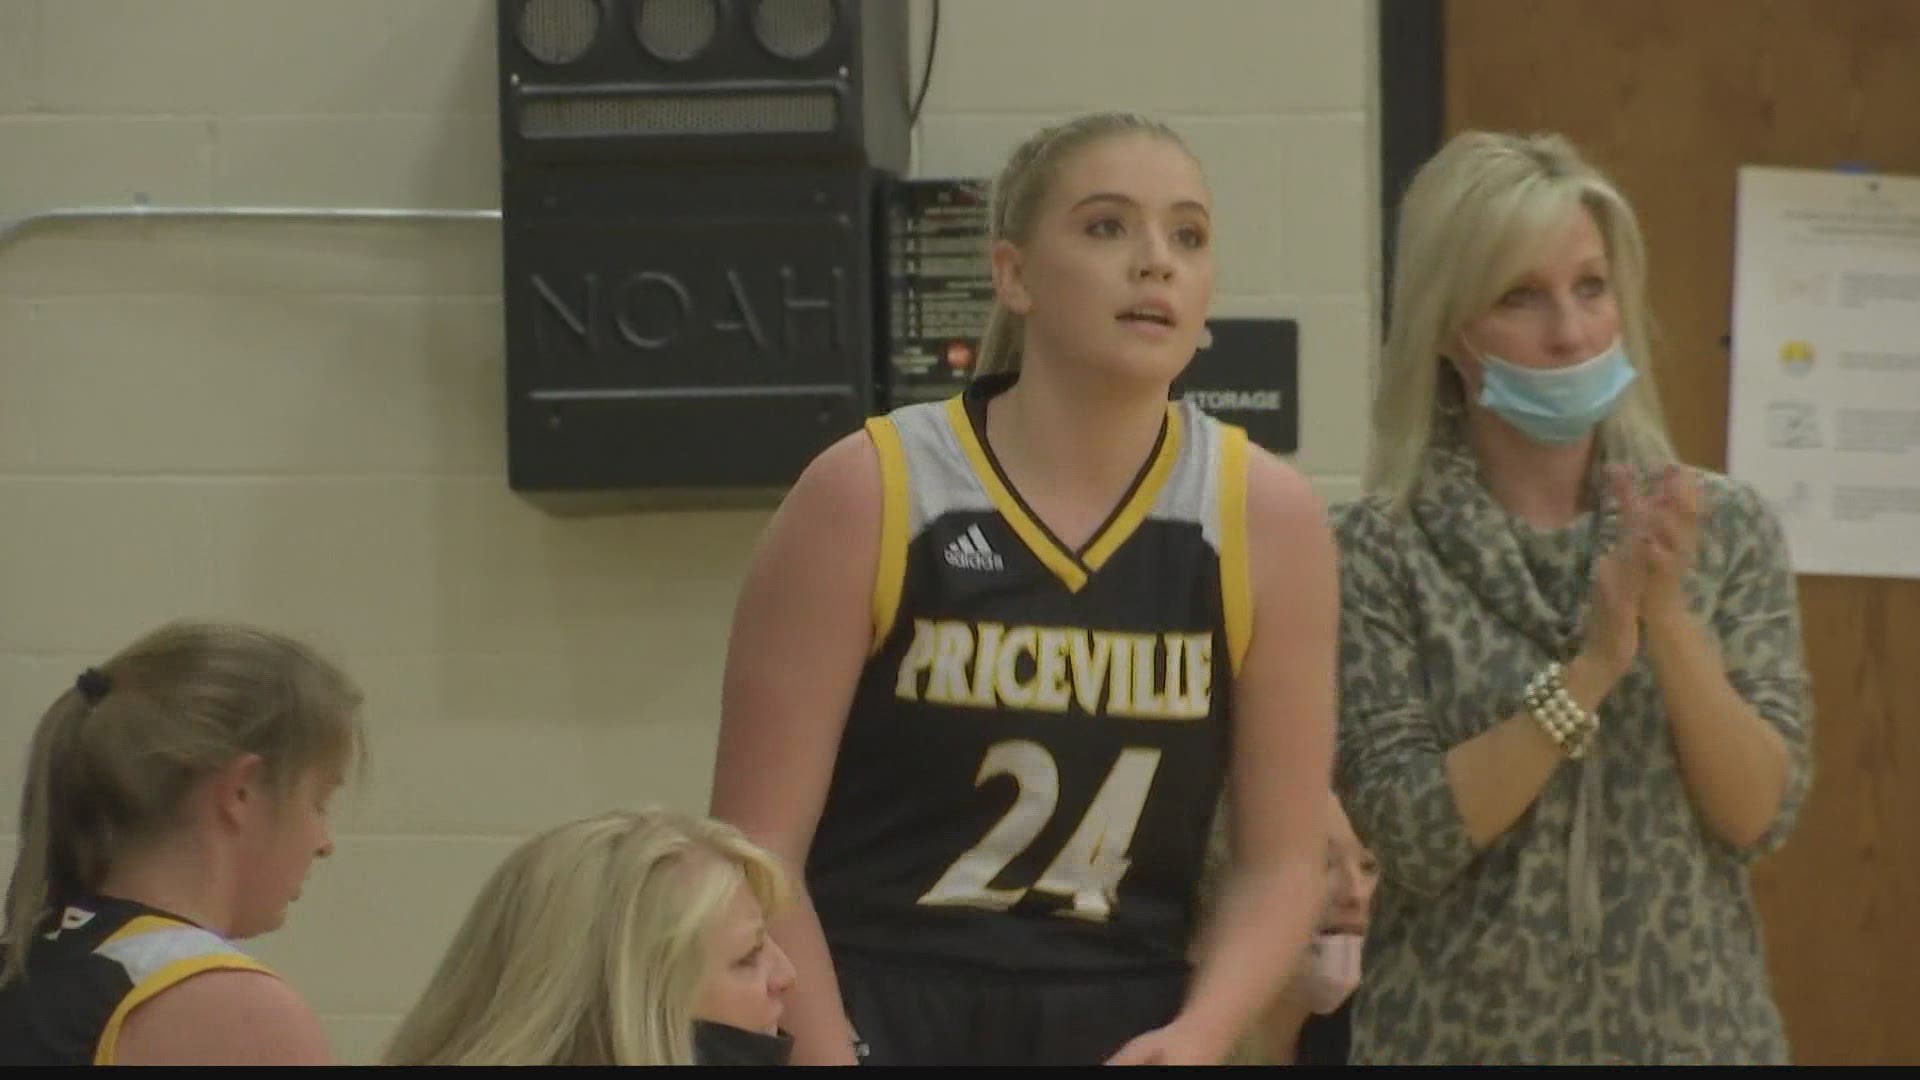 Jenna Walker scored 14 points and dished out 9 assists in Priceville's 84-21 victory over St John Paul II. Lady Bulldogs are 3-0 in region play